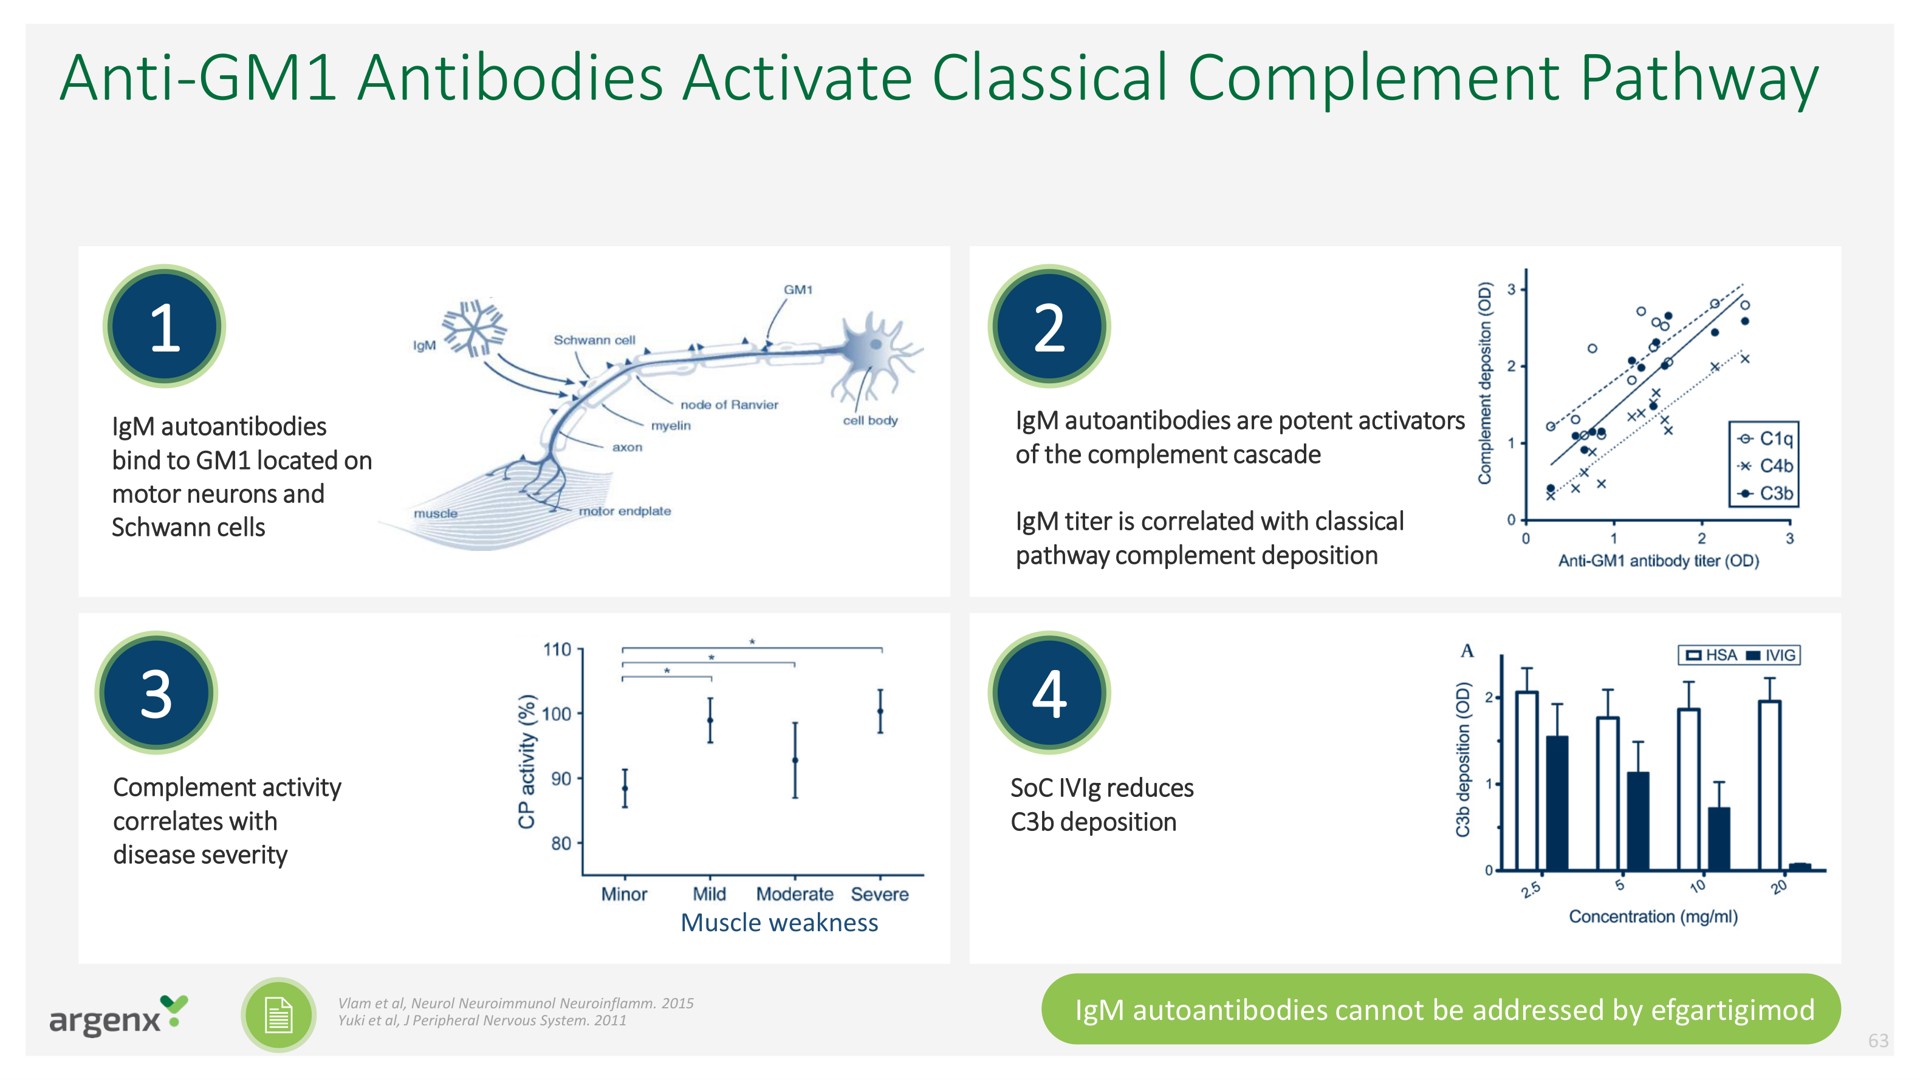 anti antibodies activate classical complement pathway | argenx SE